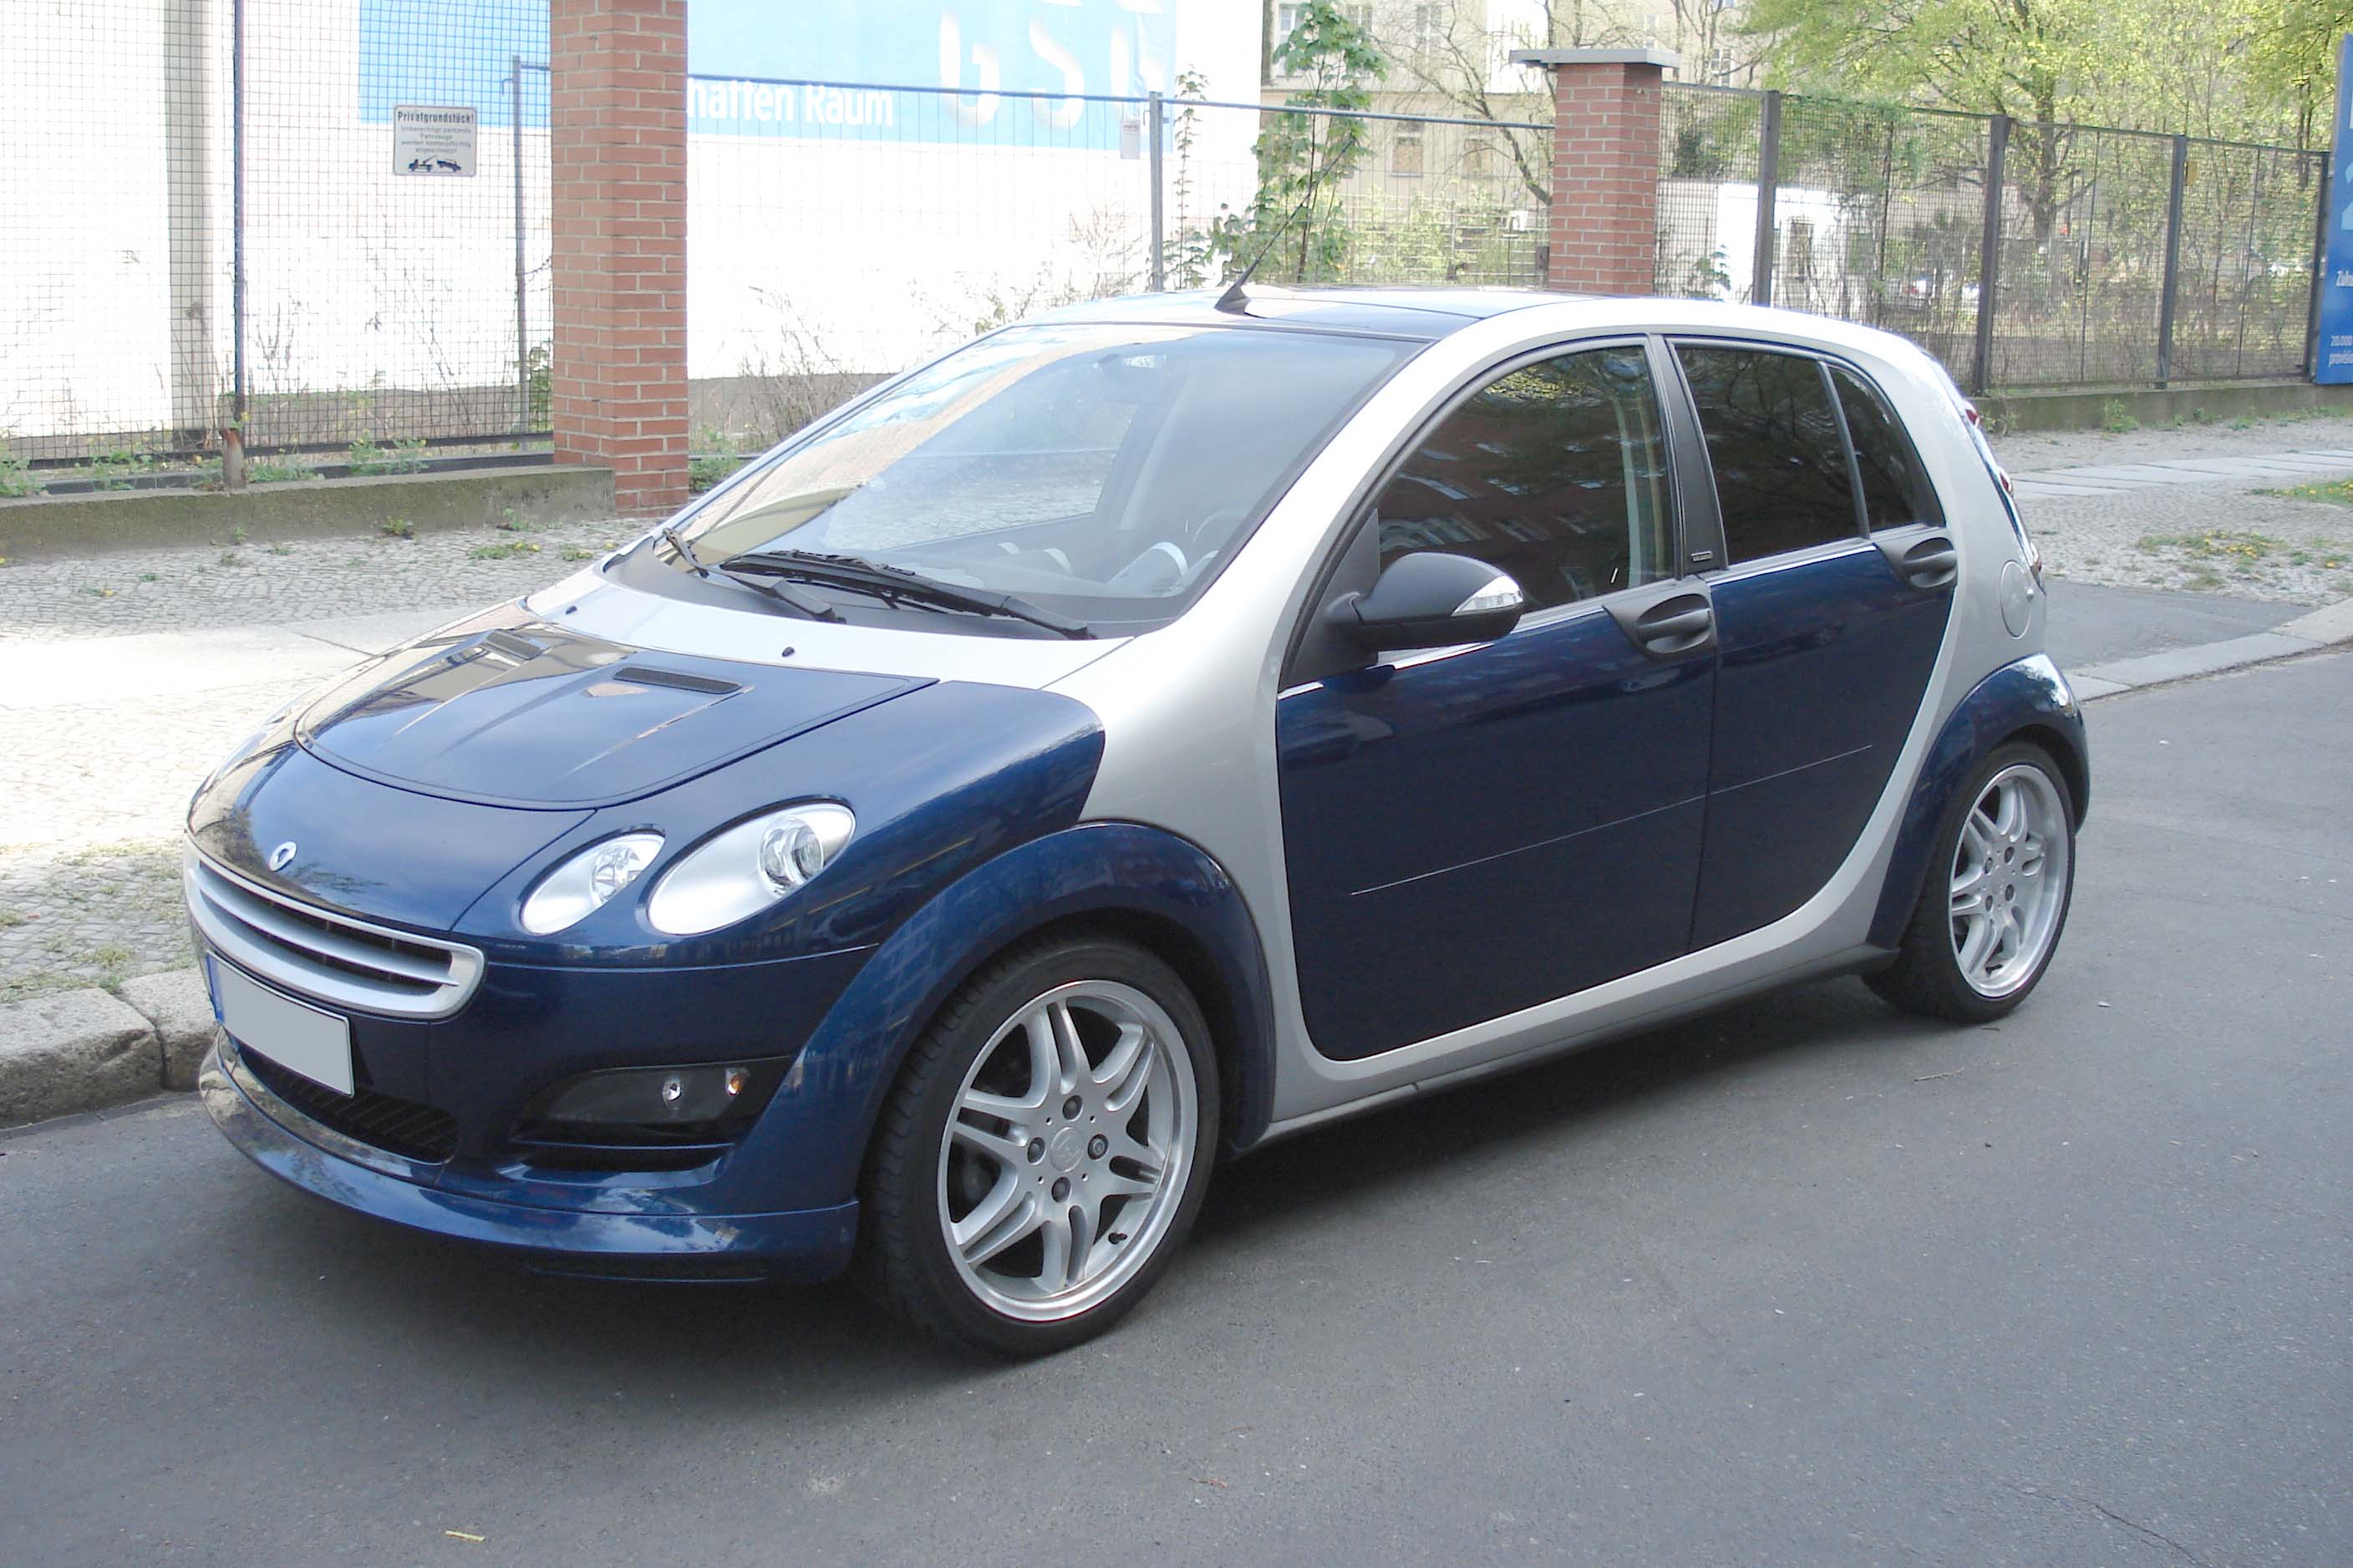 File:Smart forfour brabus blue front.jpg - Wikimedia Commons